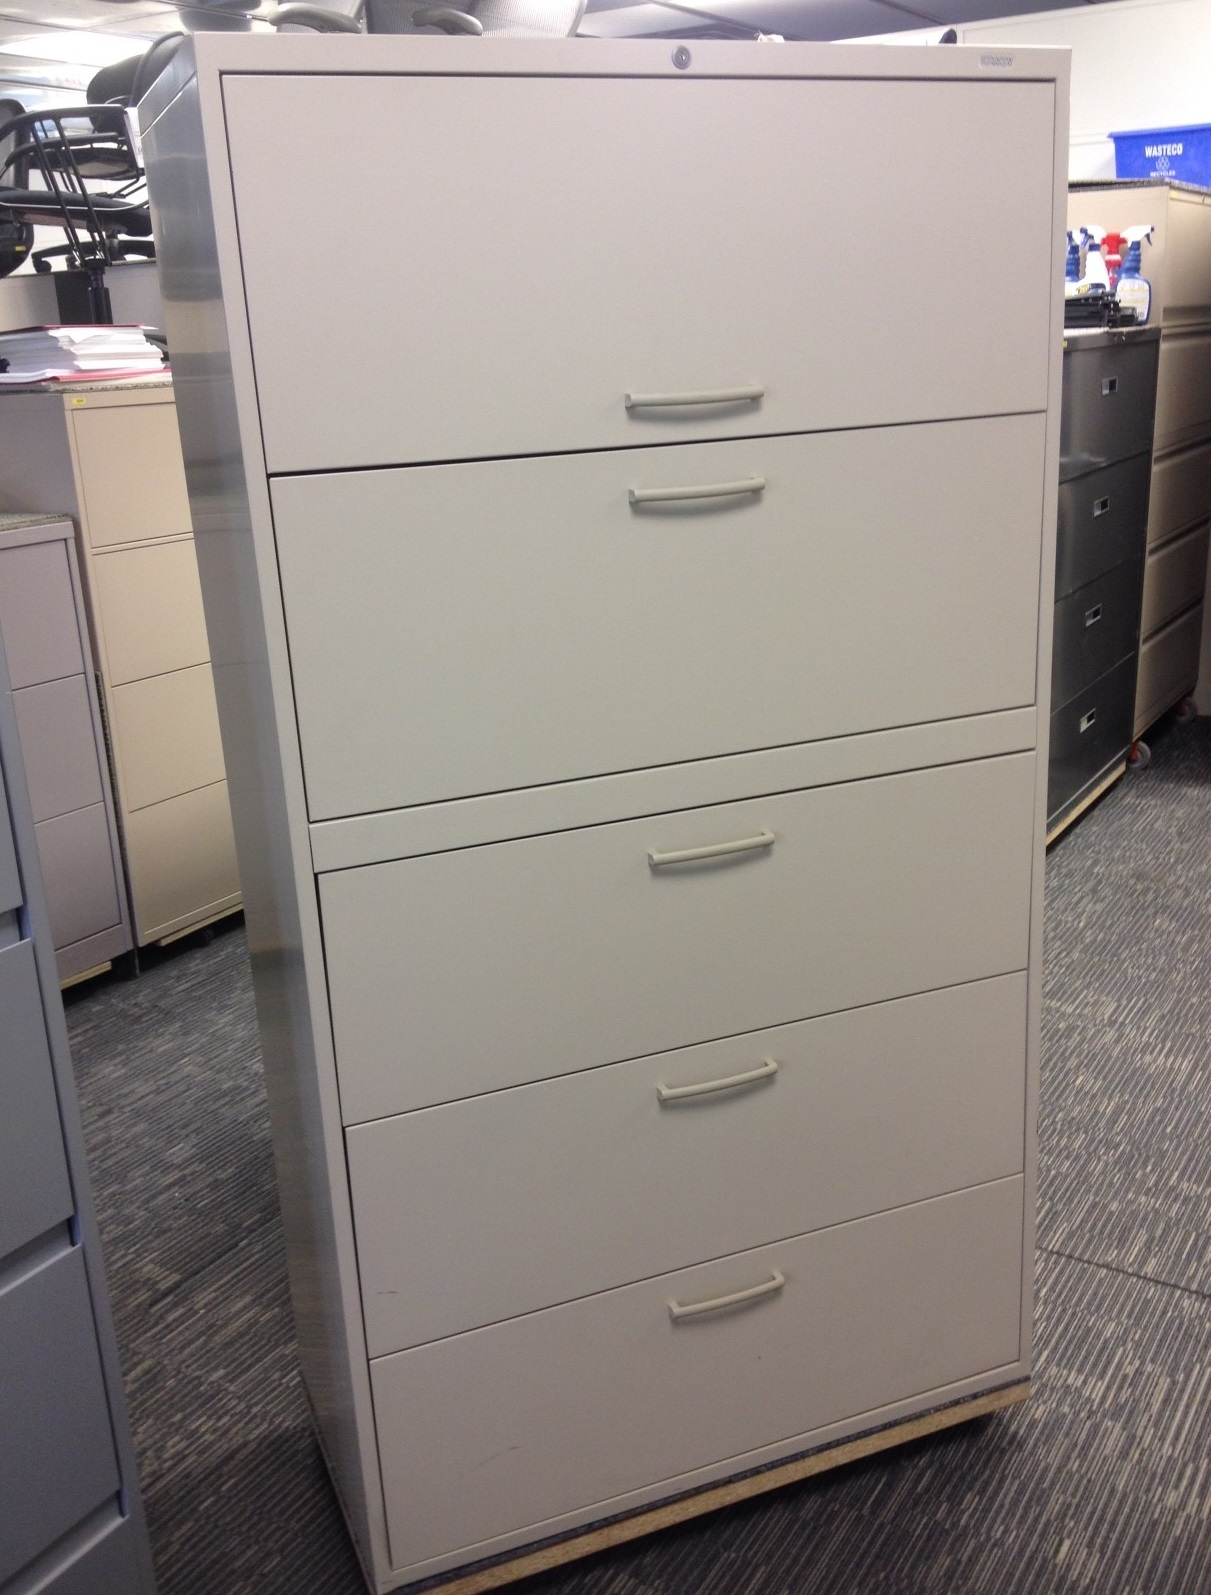 5 Drawer Lateral Filing Cabinet Teknion Tos Vertical File Cabinet Rails with regard to size 1211 X 1595